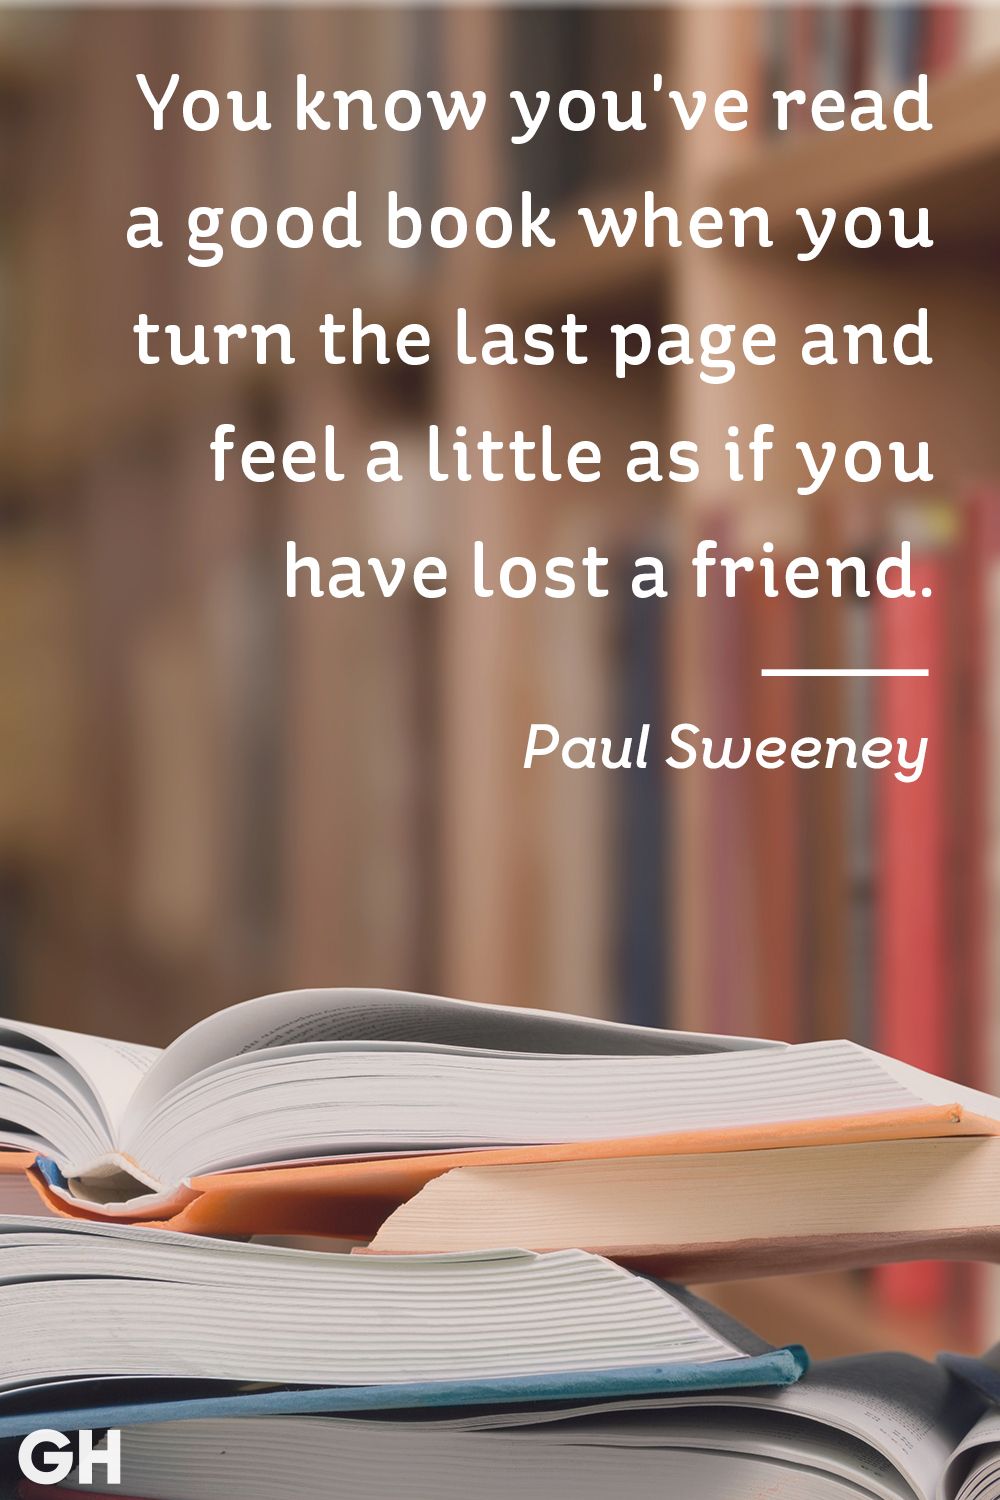 100 Most Inspirational Quotes And Sayings About Books